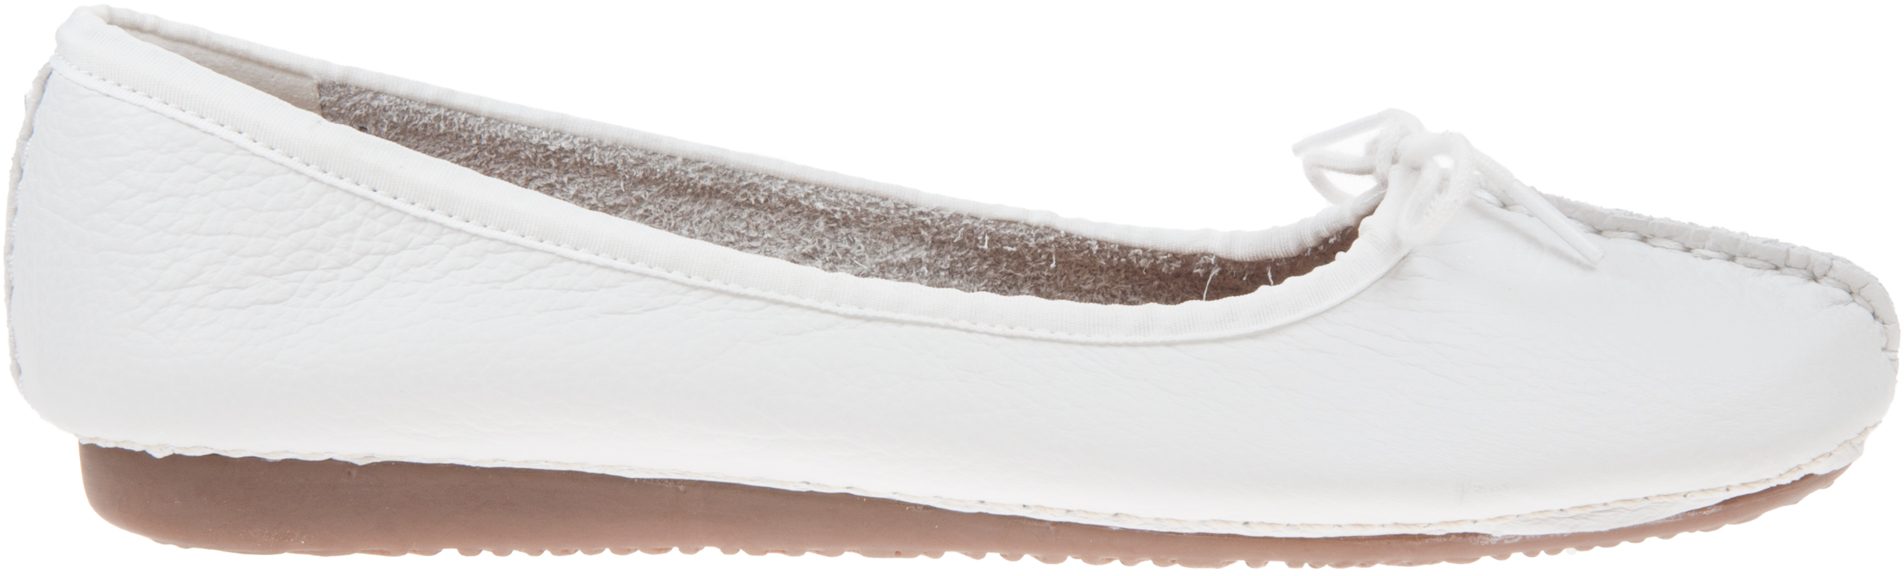 Clarks Freckle Ice White Leather 20354455 - Everyday Shoes - Humphries ...